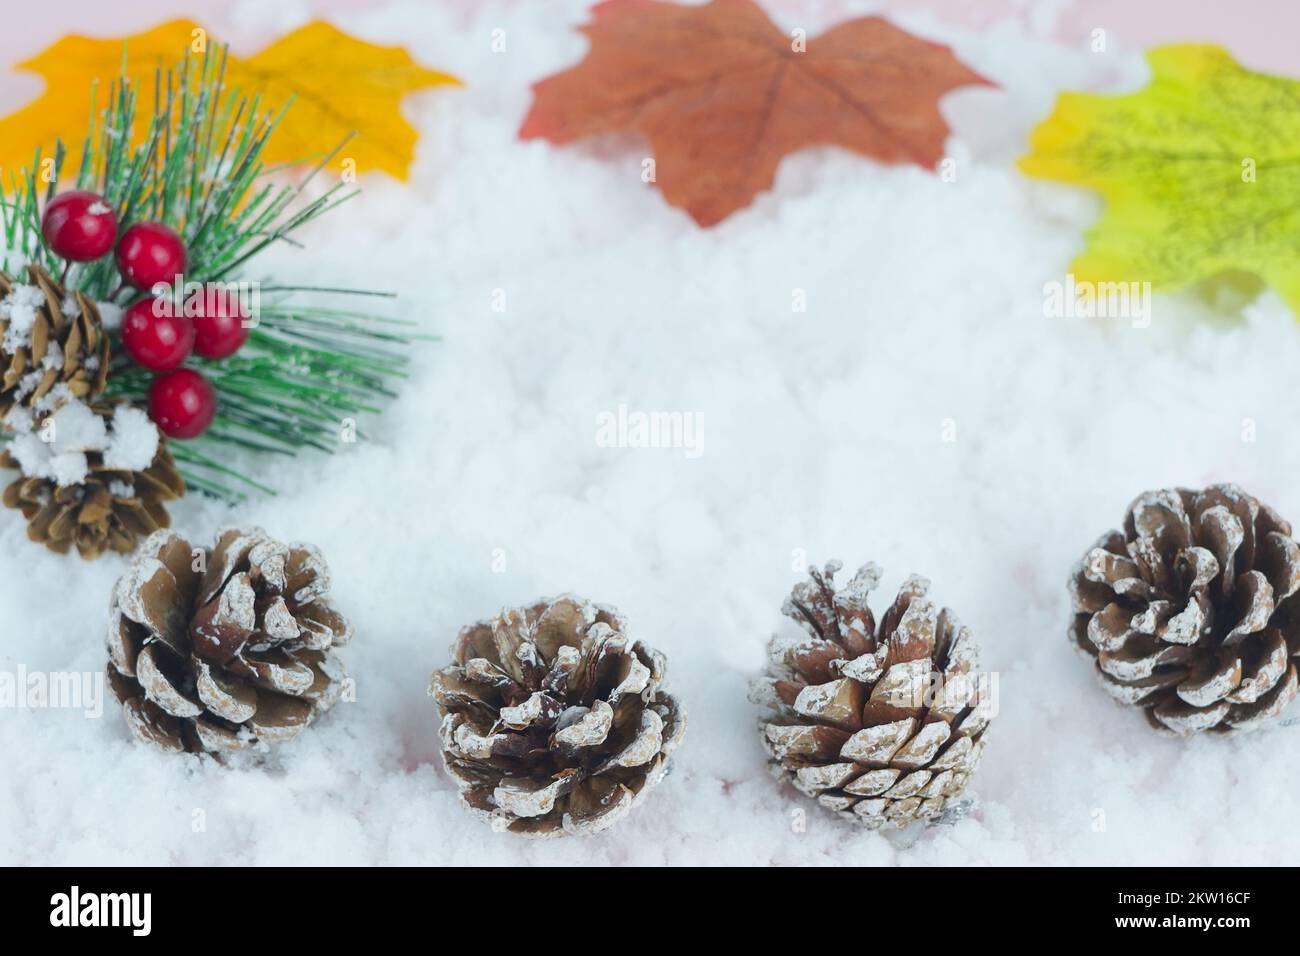 Up of fallen maple leaves on the snow Stock Photo